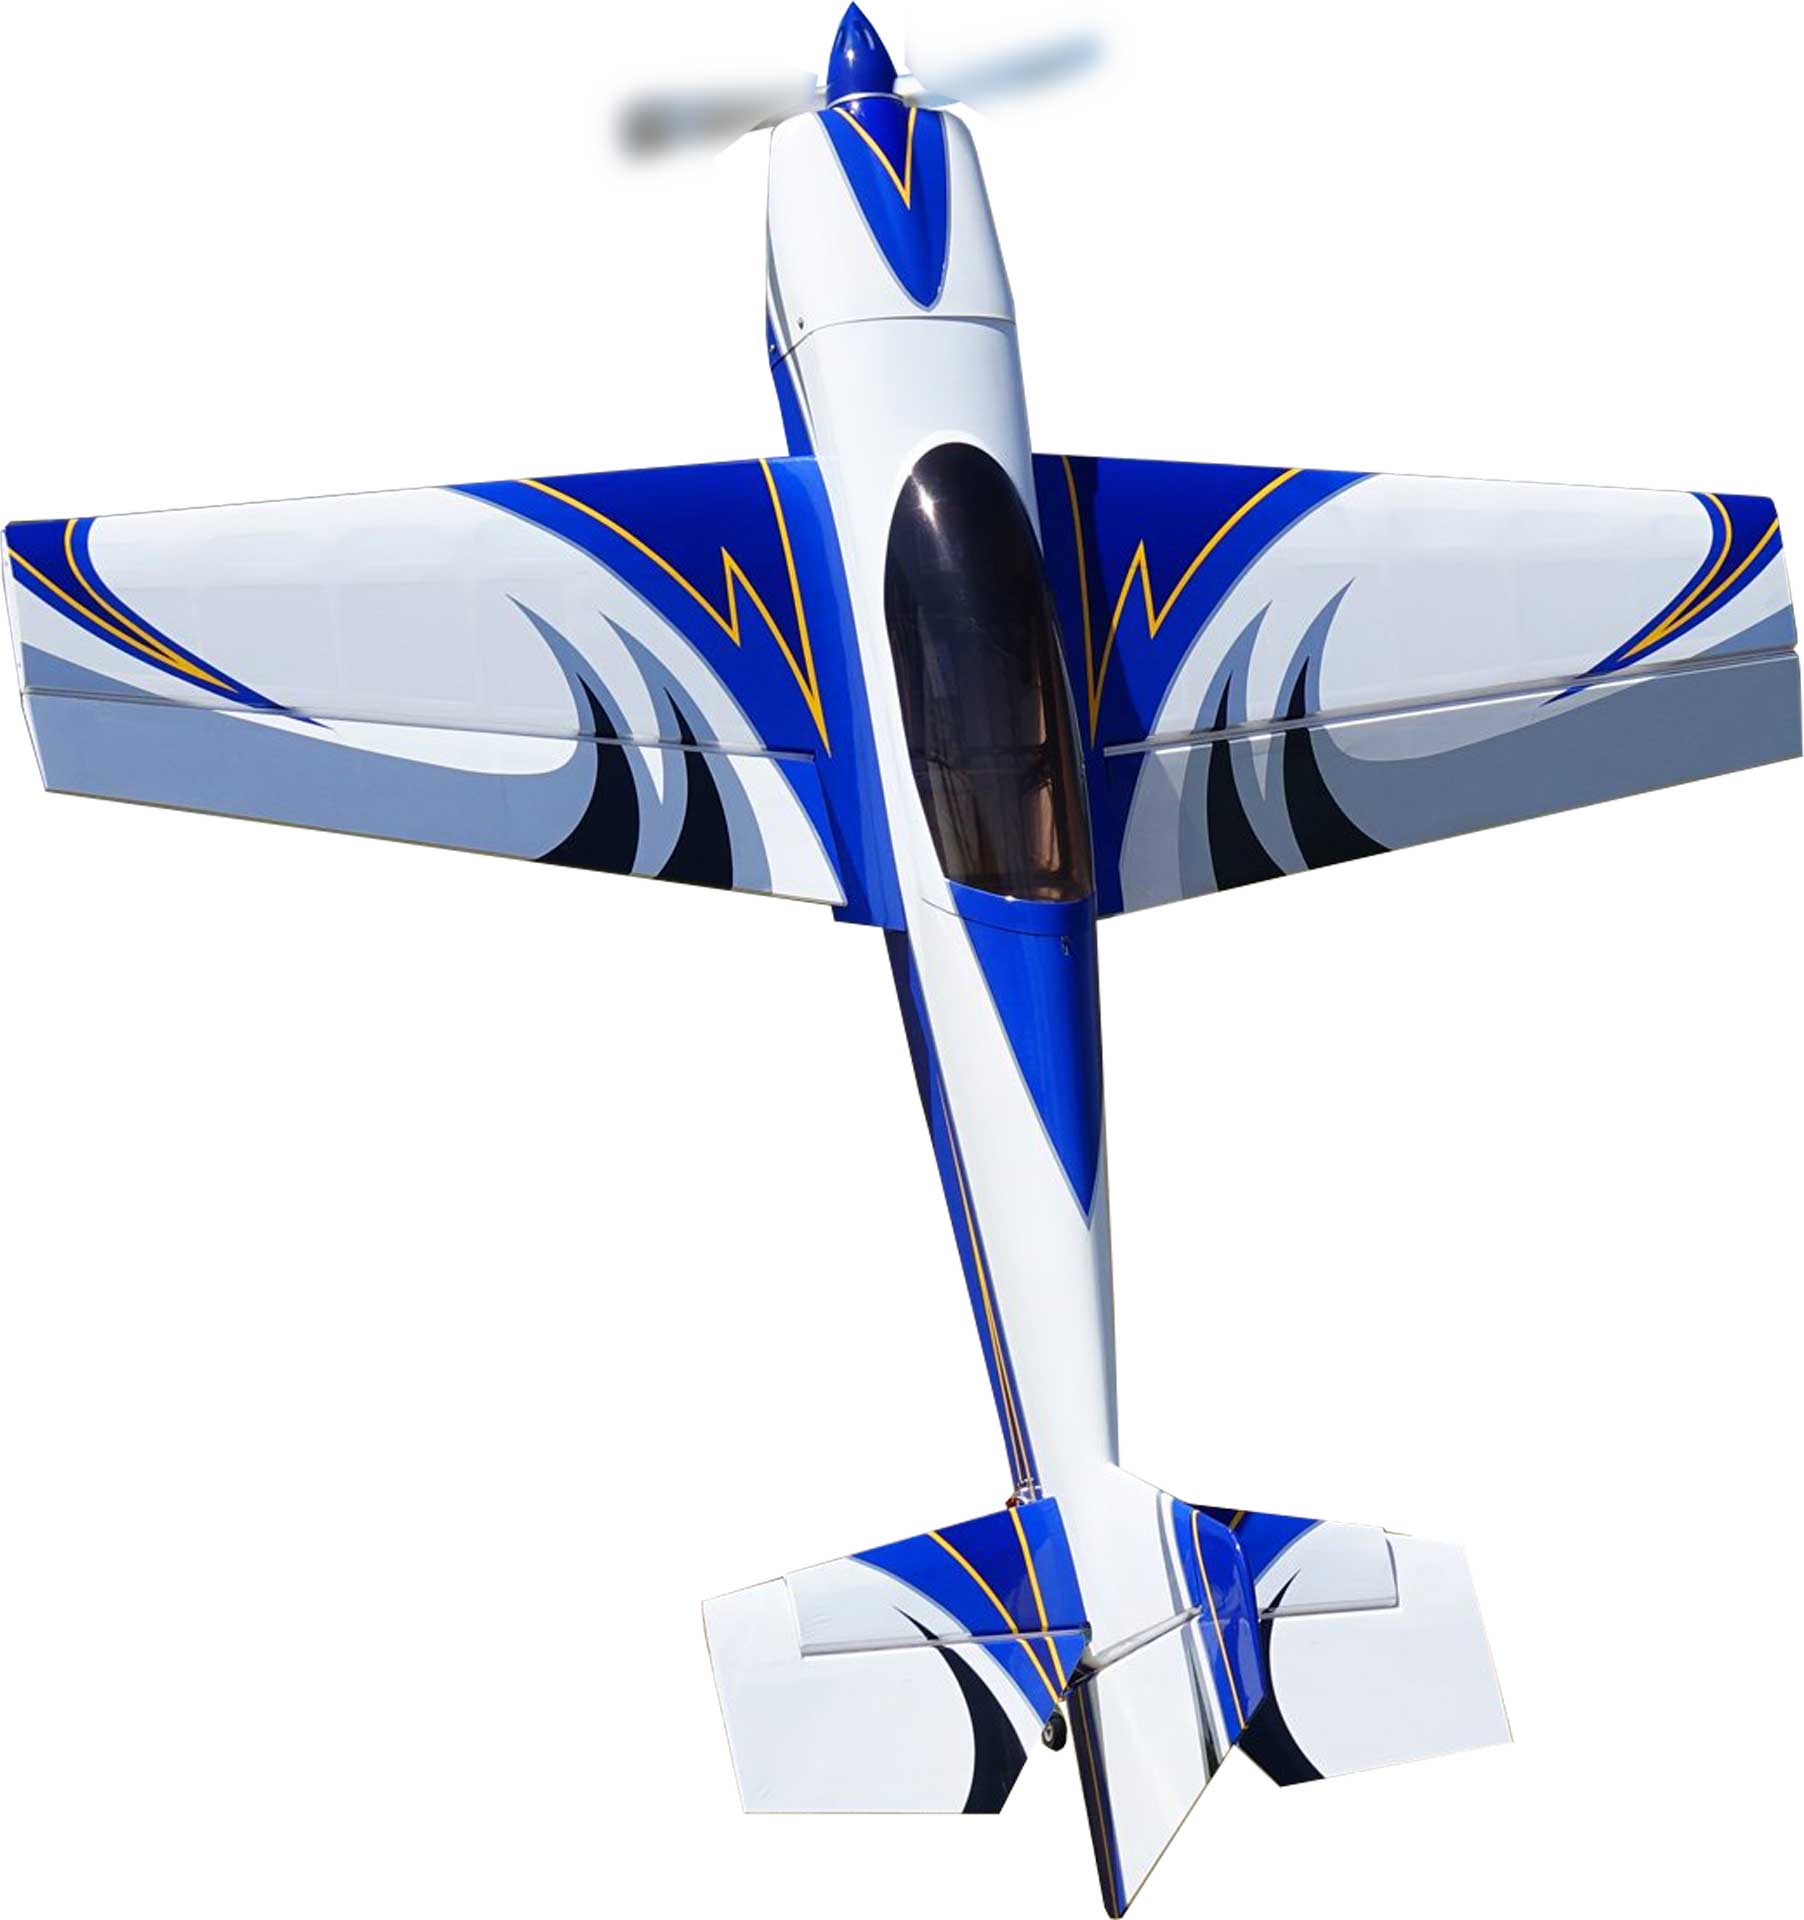 EXTREMEFLIGHT-RC Extra NG 60" blue / white RXR receiver ready (receiver "ready" )